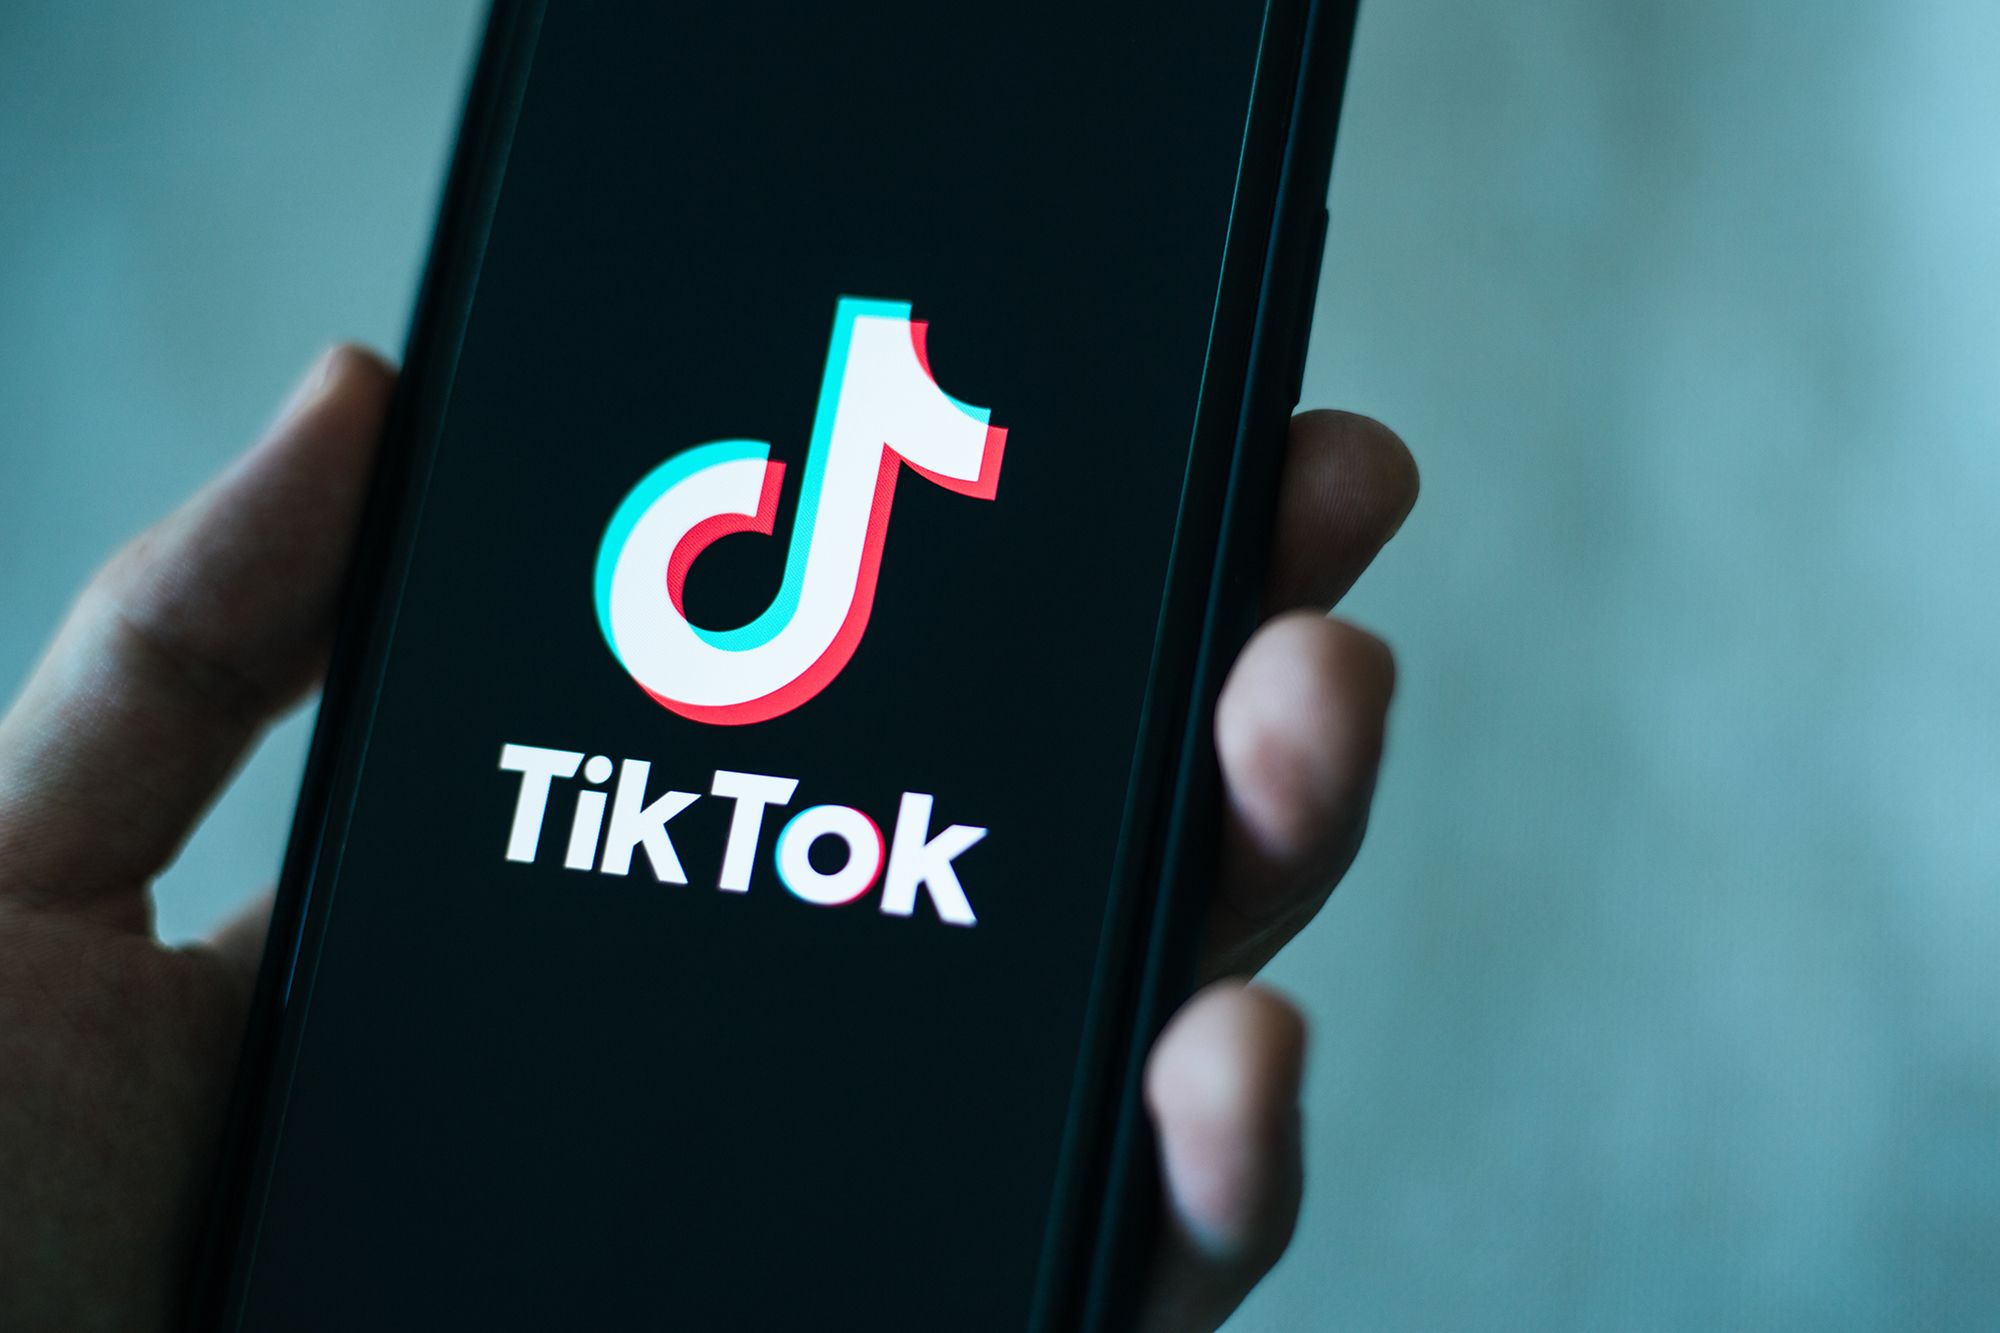 Agencies have 30 days to ban TikTok on government devices, White